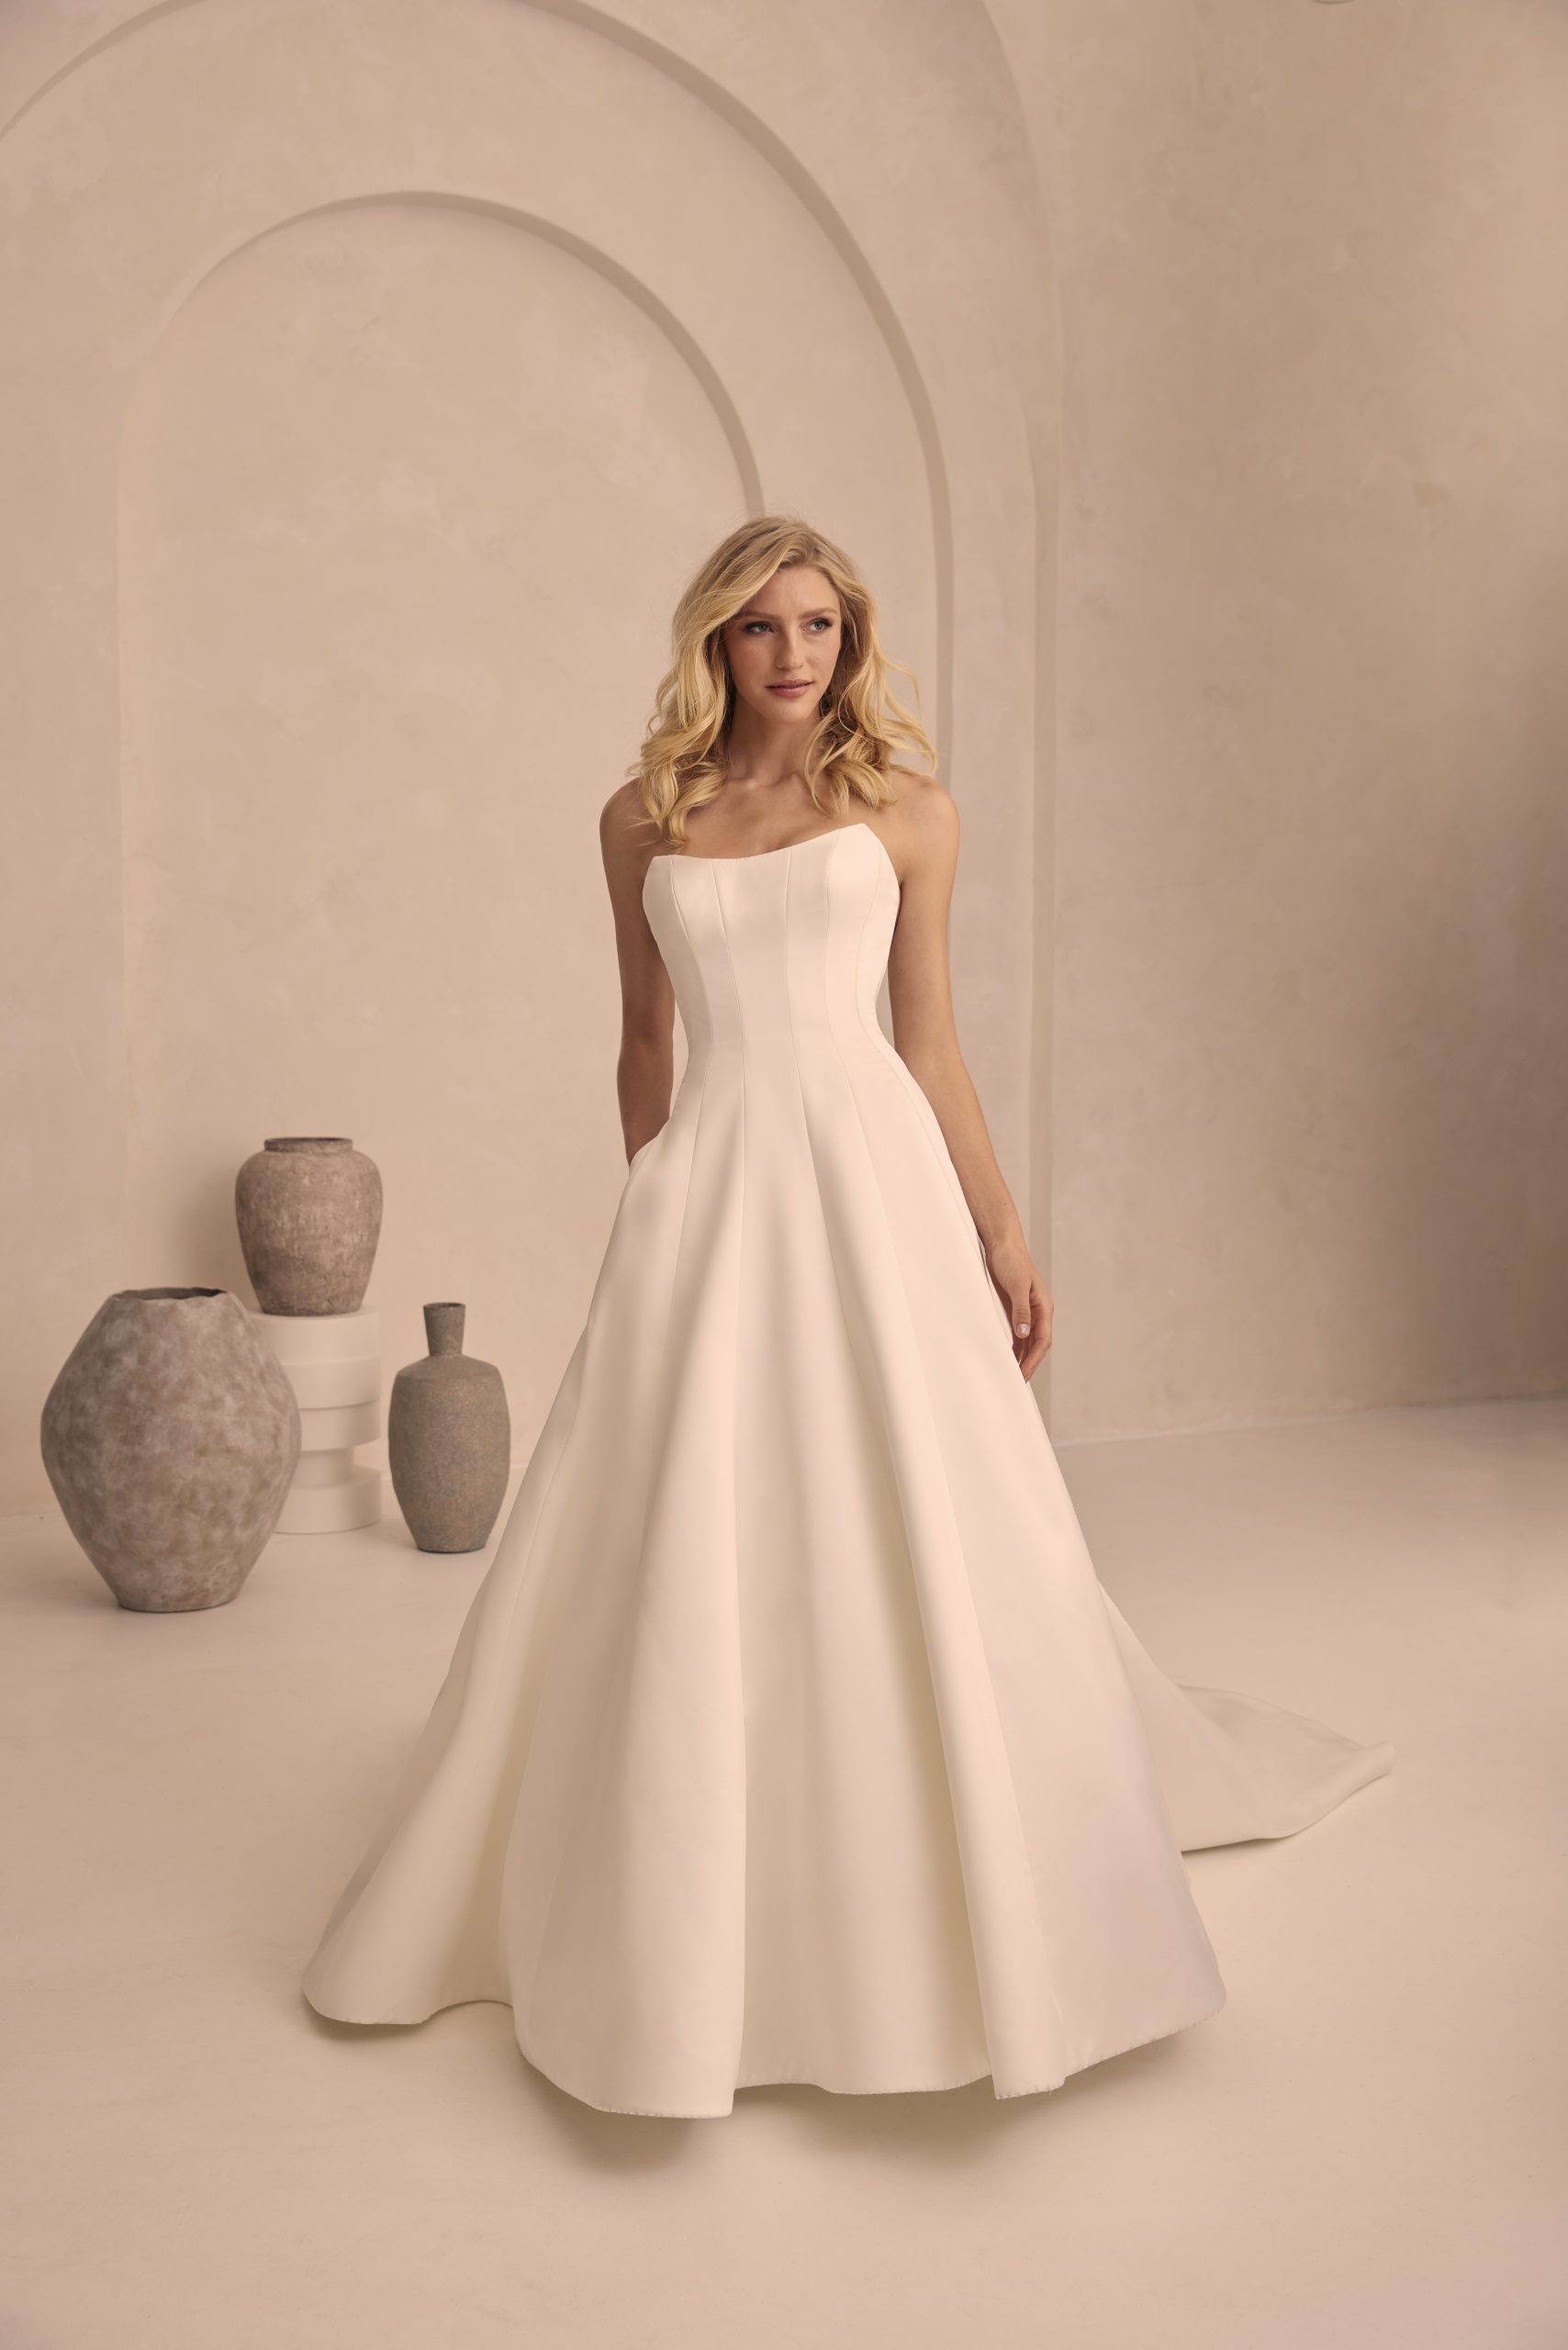 Chic and Simple Satin Modified A-Line Wedding Dress With Buttons by Mikaella Bridal - Image 1